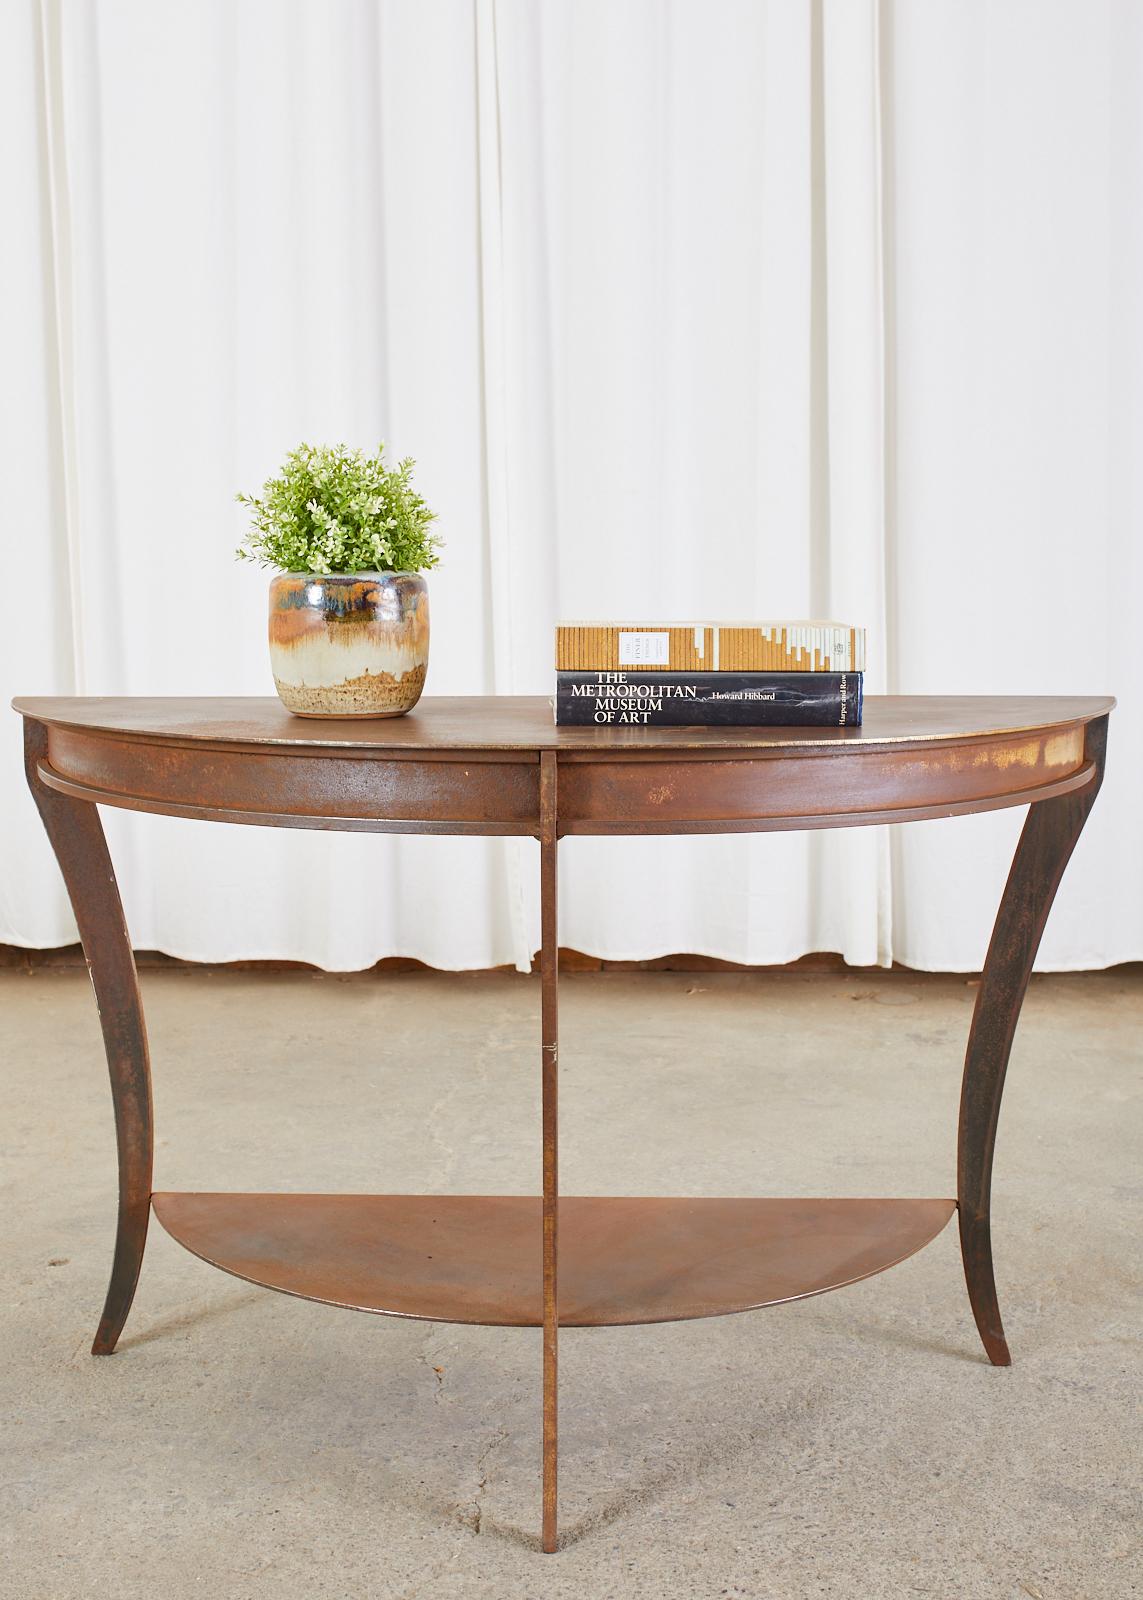 Dramatic pair of iron demi-lune console tables featuring a patinated metal finish. The elegant two-tier design has gracefully curved klismos style saber legs conjoining the shelves. The rich patinated finish could be painted, polished, or left as is